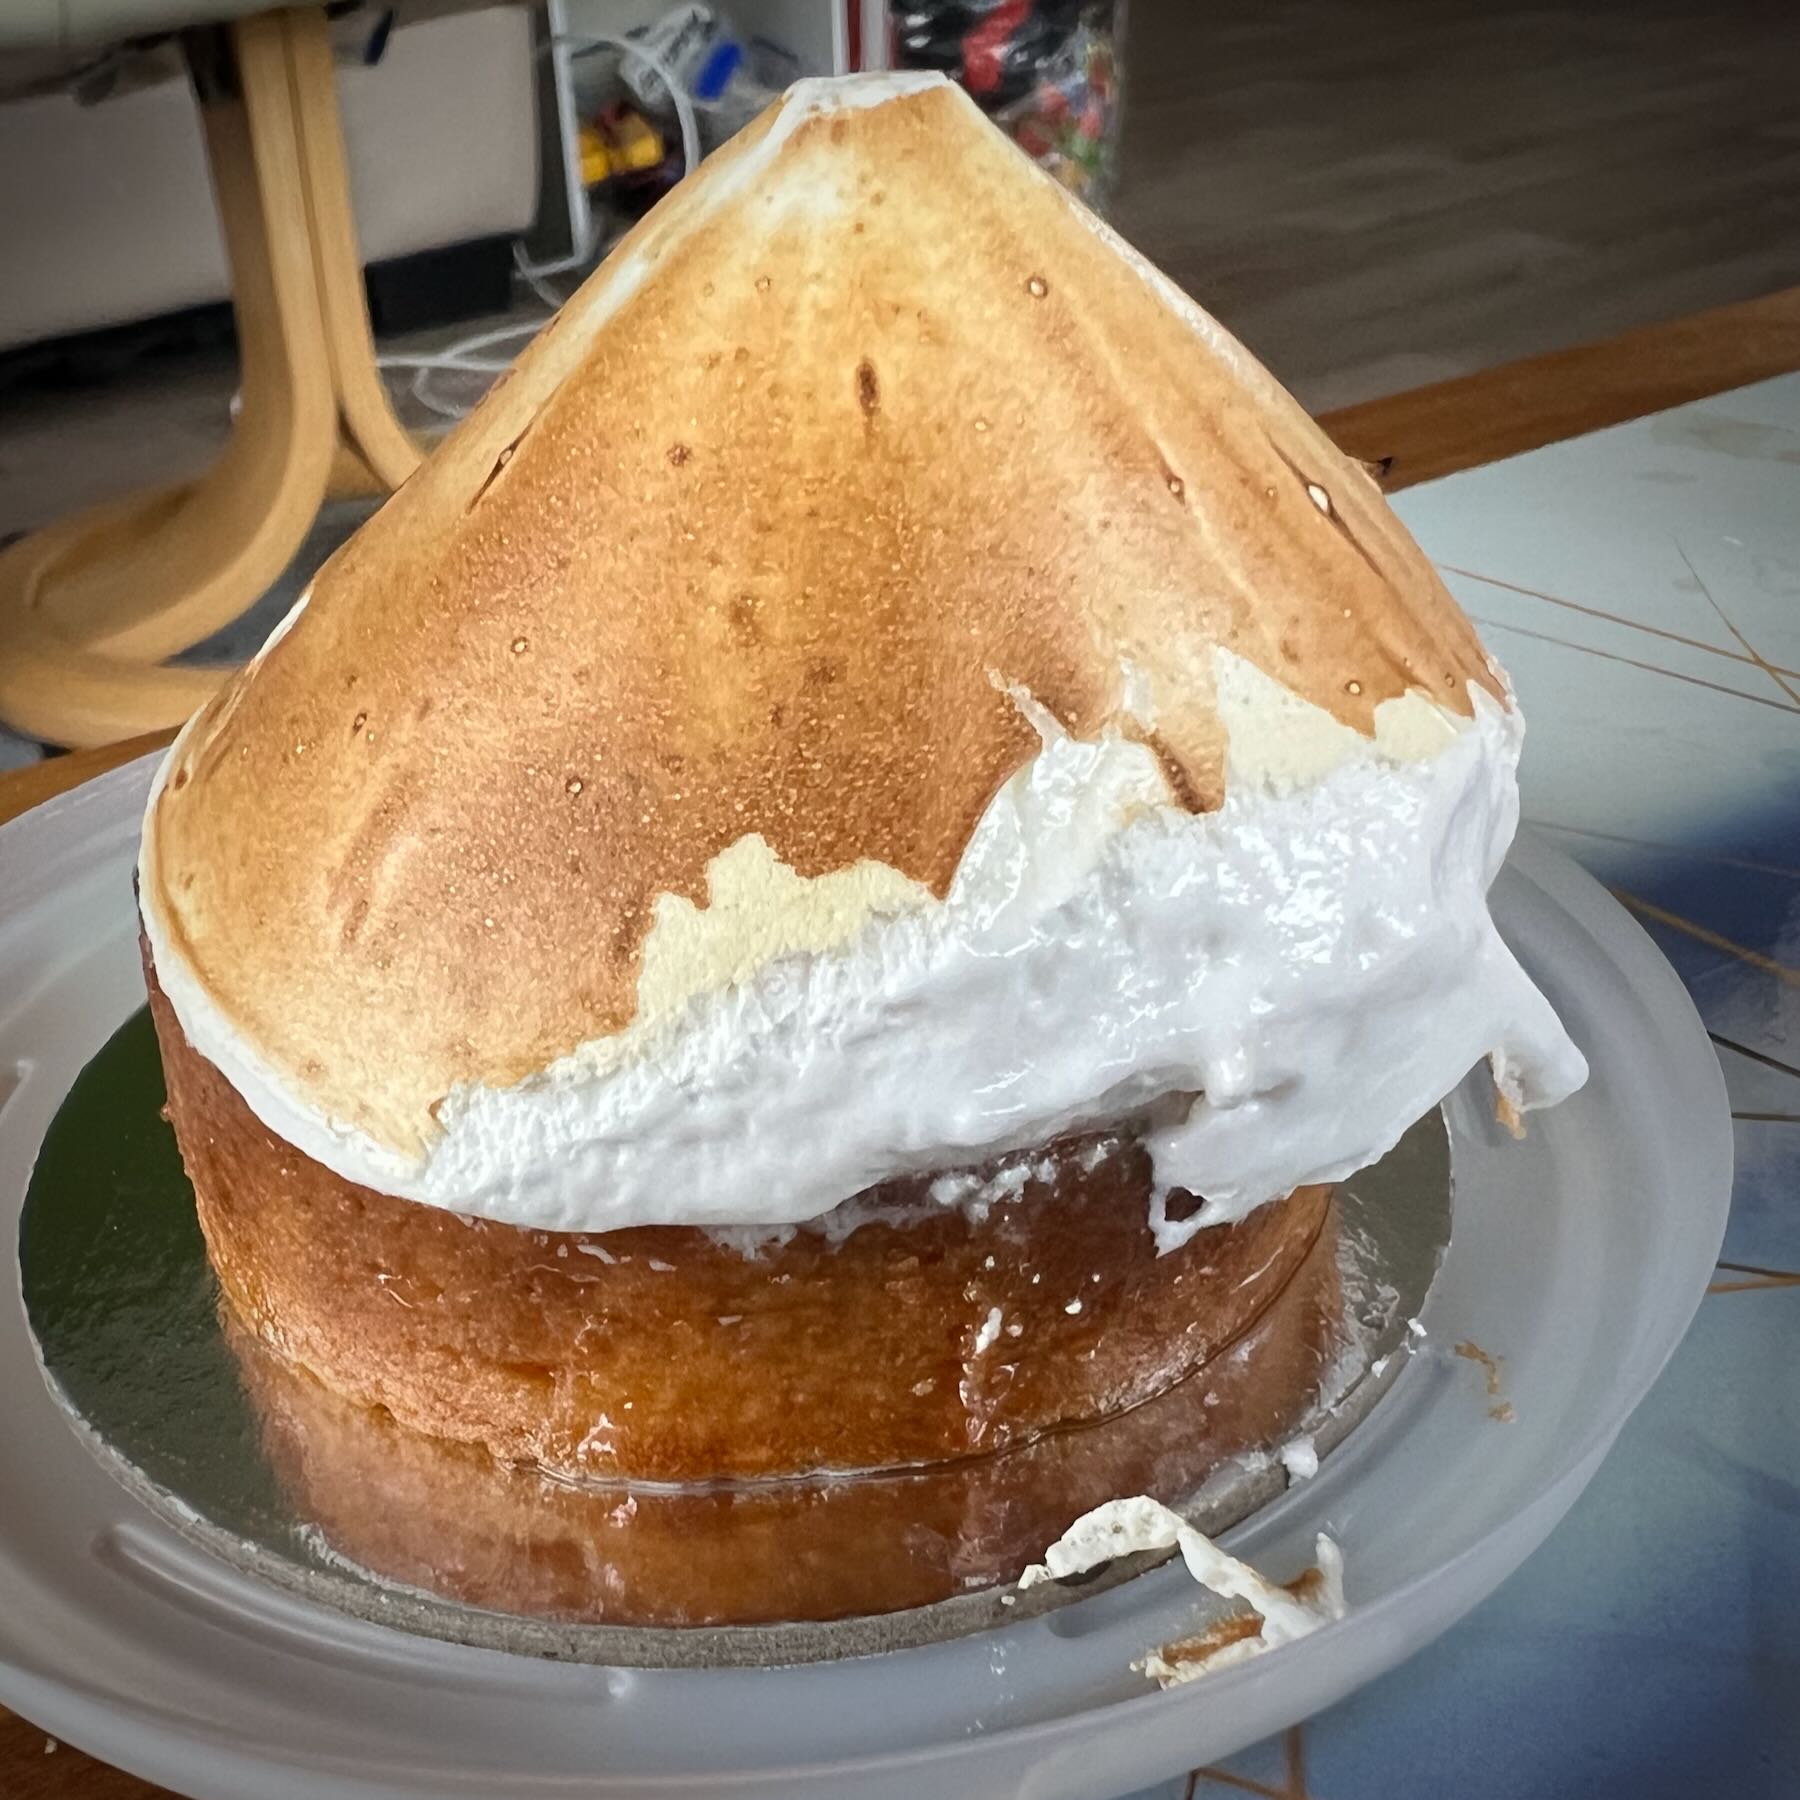 A small tart shaped rather like Mt Fuji, with crust below and browned cream or meringue on top. 